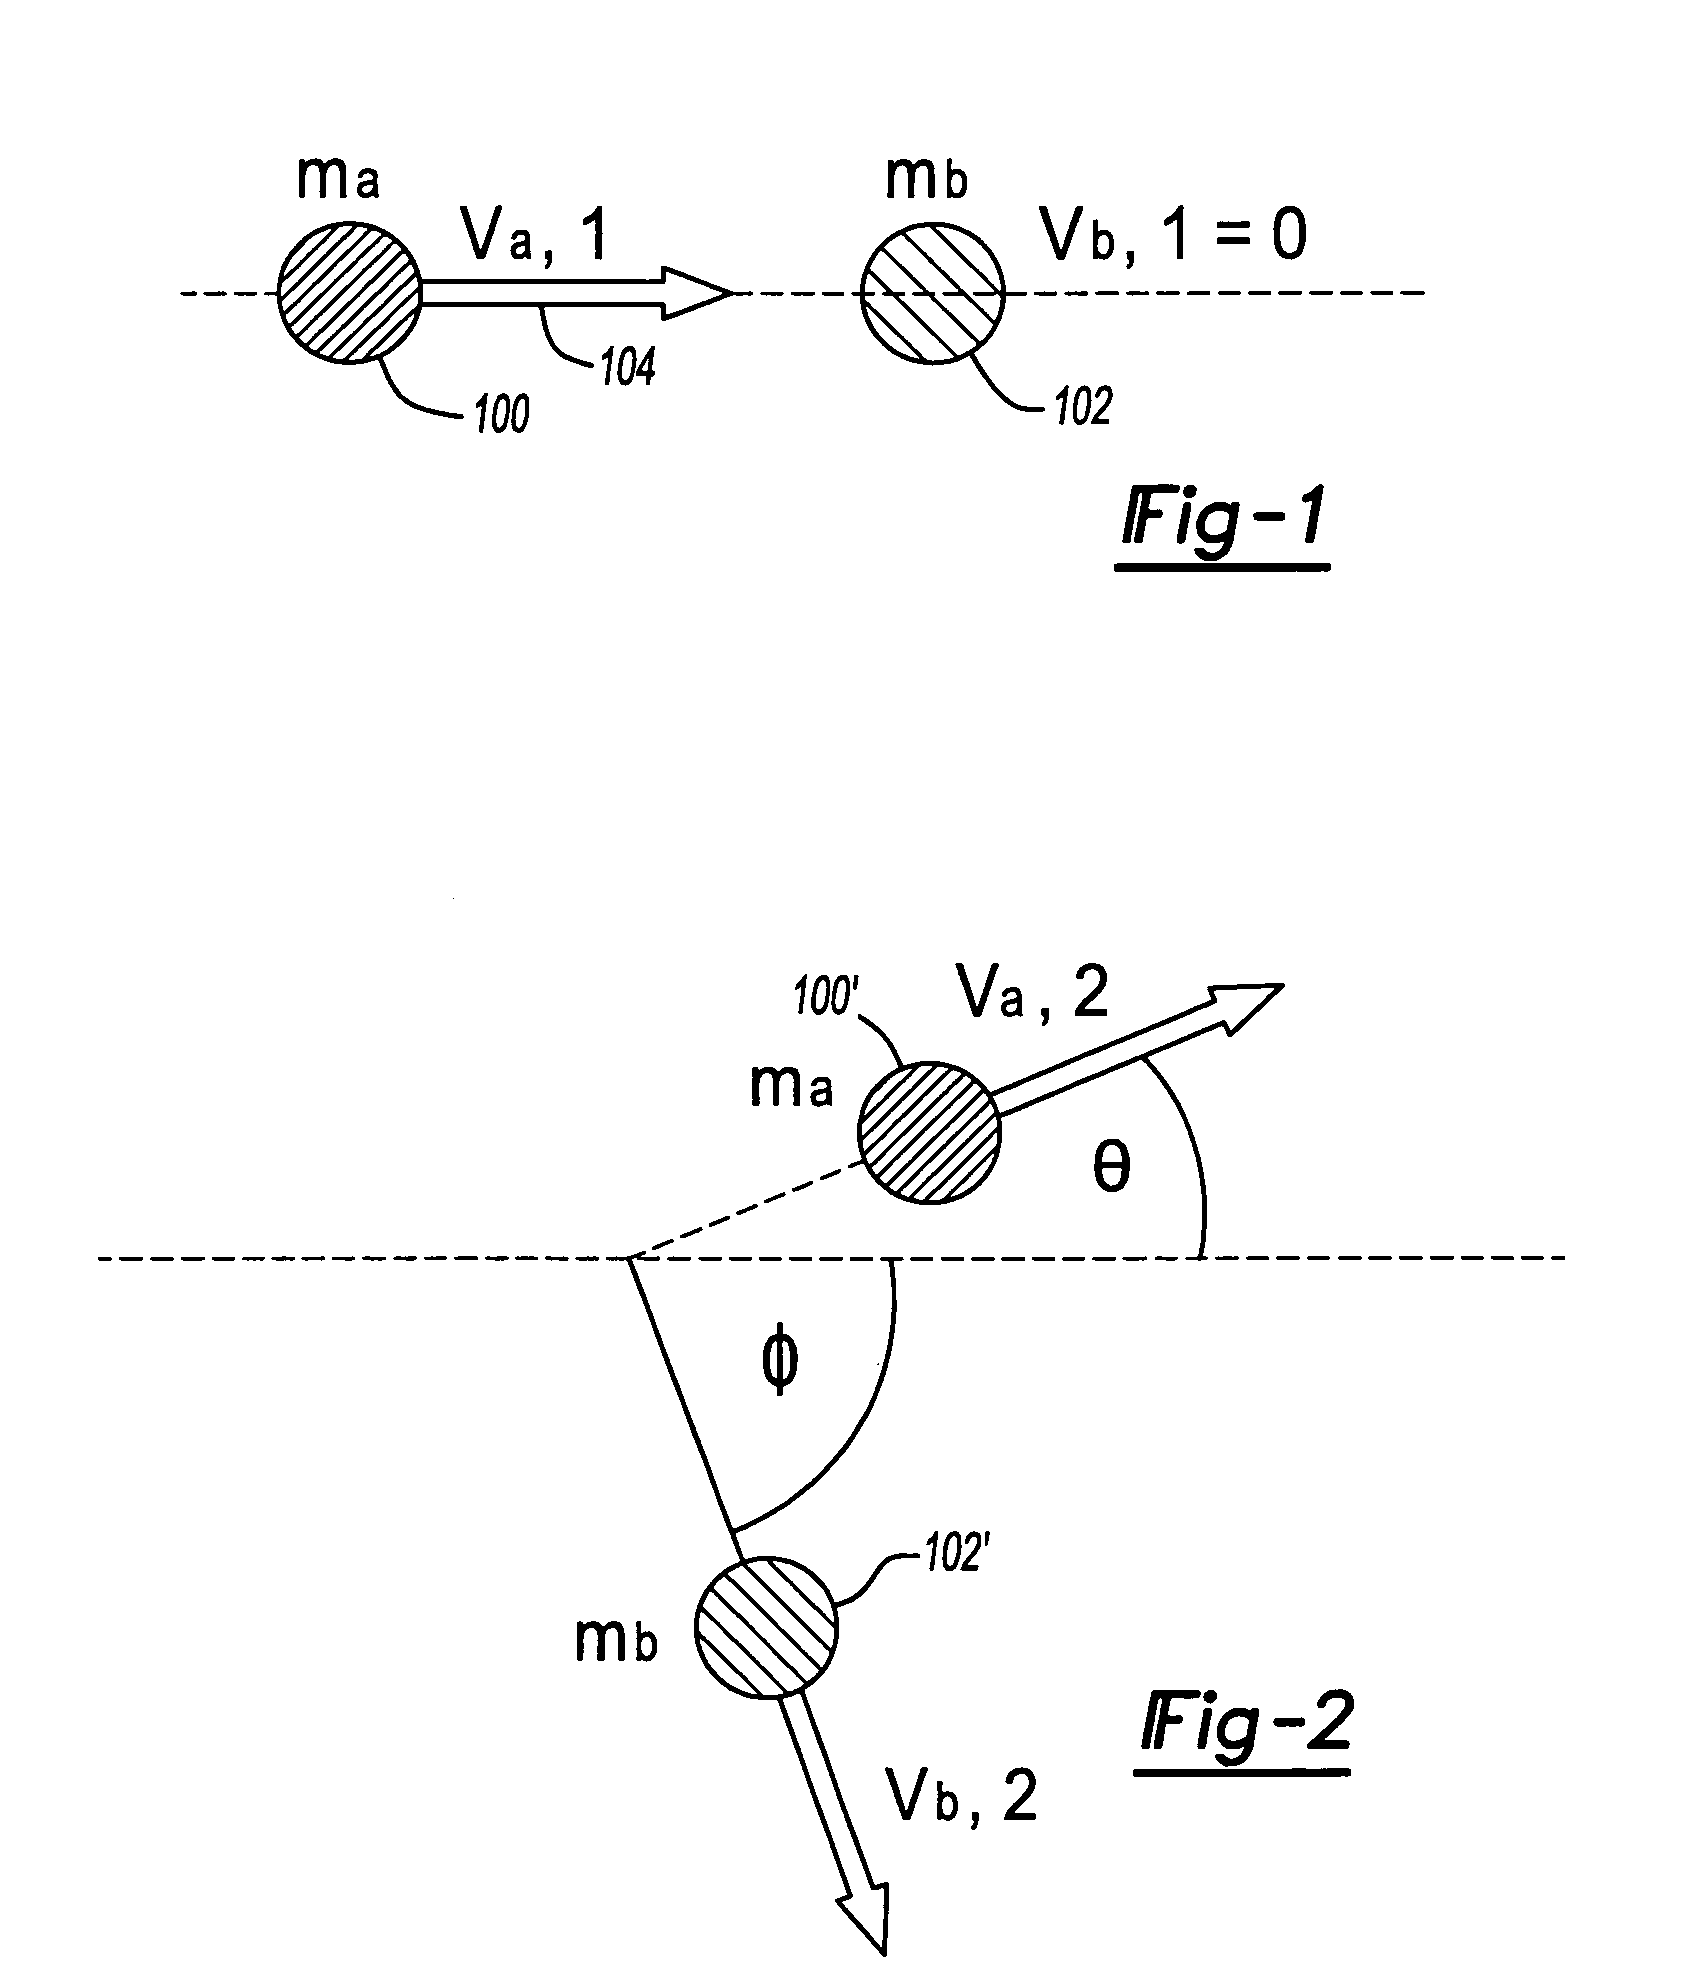 Neutron irradiative methods and systems